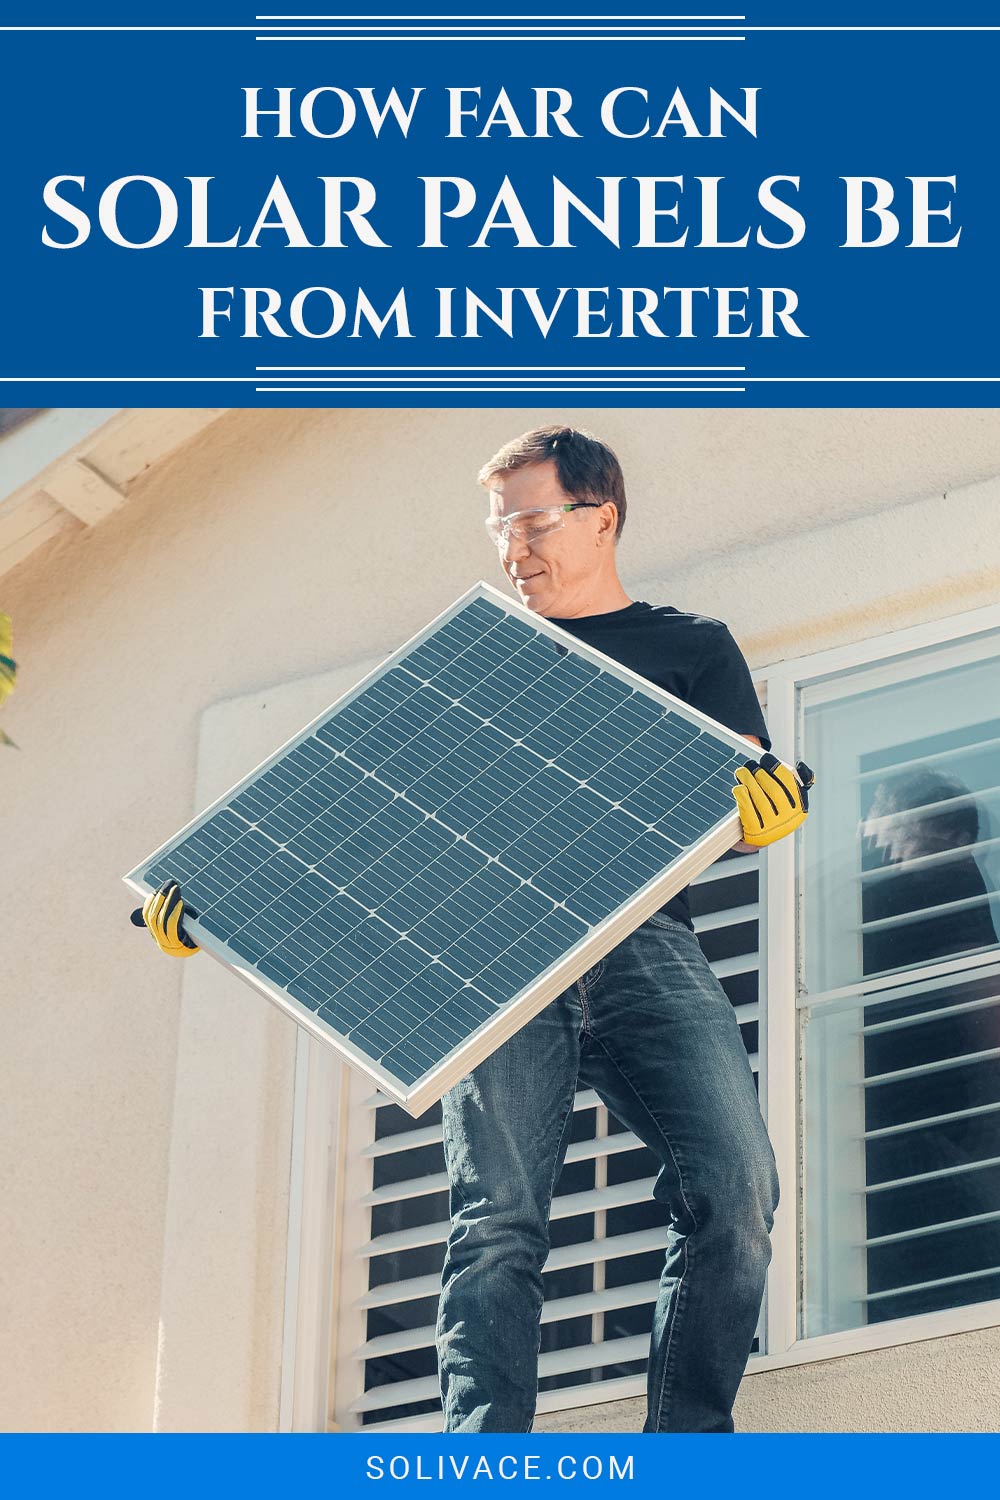 How Far Can Solar Panels Be From Inverter